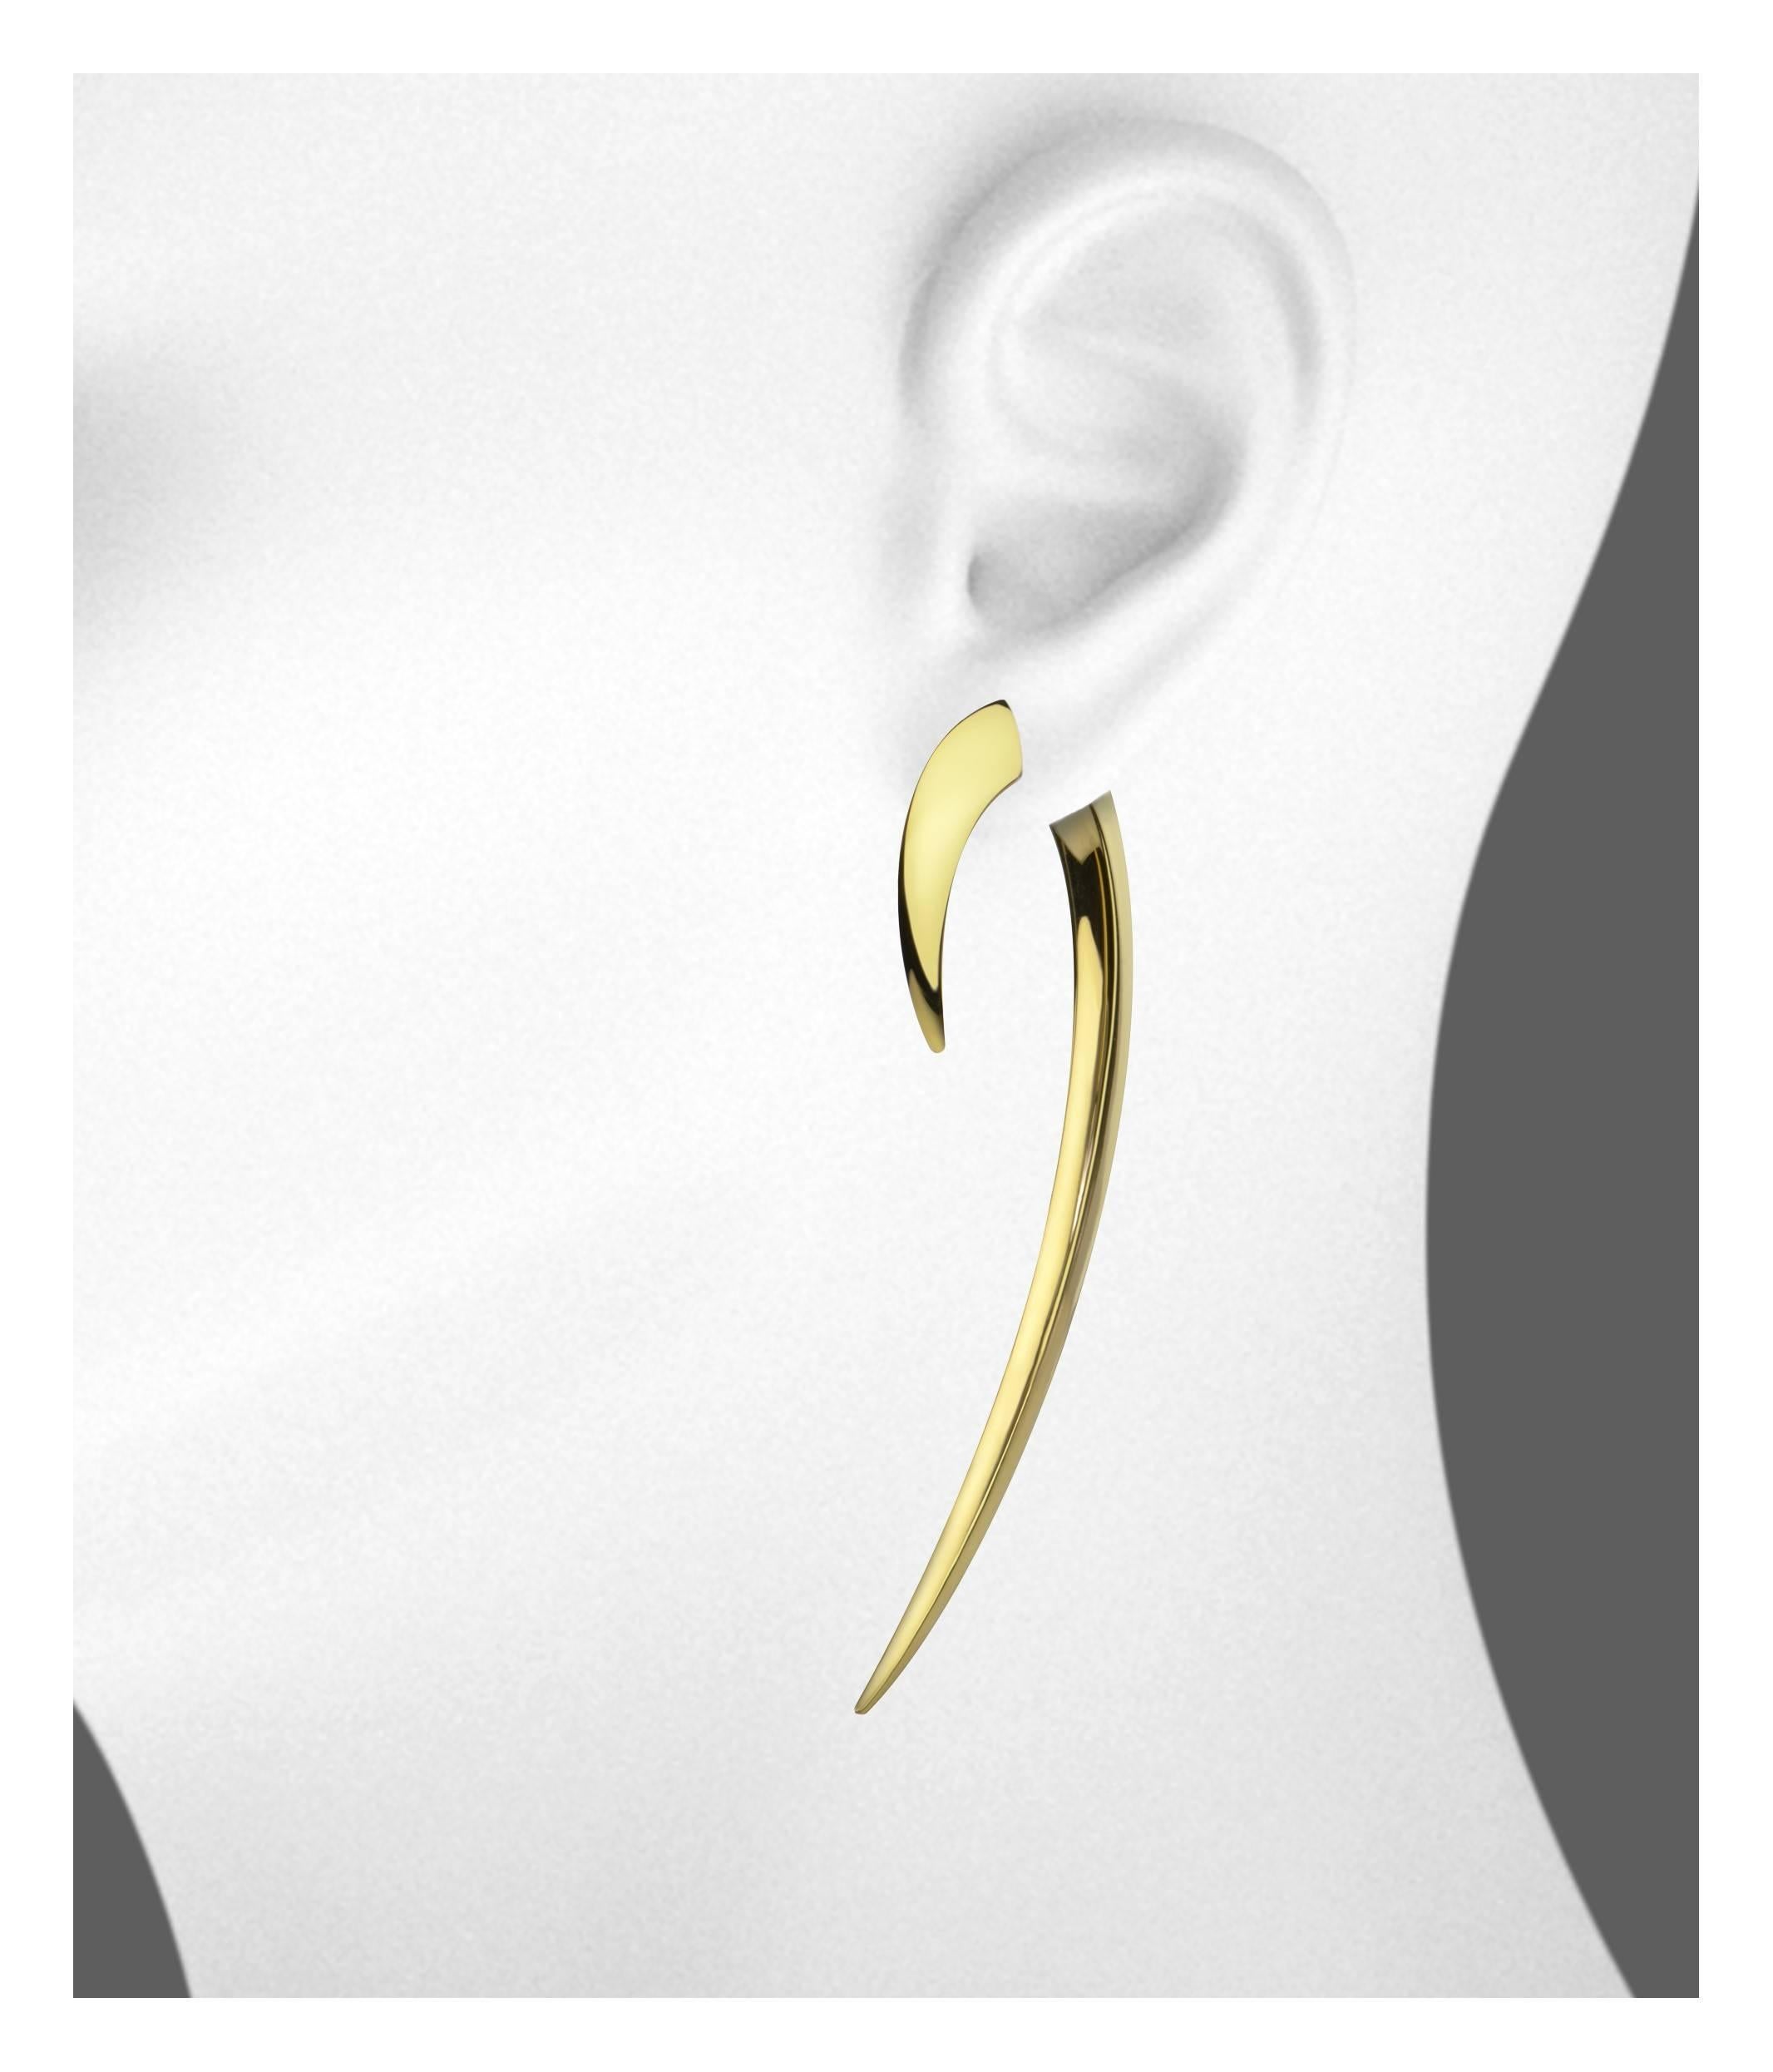 18ct Yellow Gold Hook Earrings from the Shaun Leane ‘Signature’ collection.  A timeless design, the Hook earrings have become synonymous with the design philosophy of Shaun Leane. 
18ct Yellow Gold
Front: 20mm
Back: 58mm
(The post of the earring